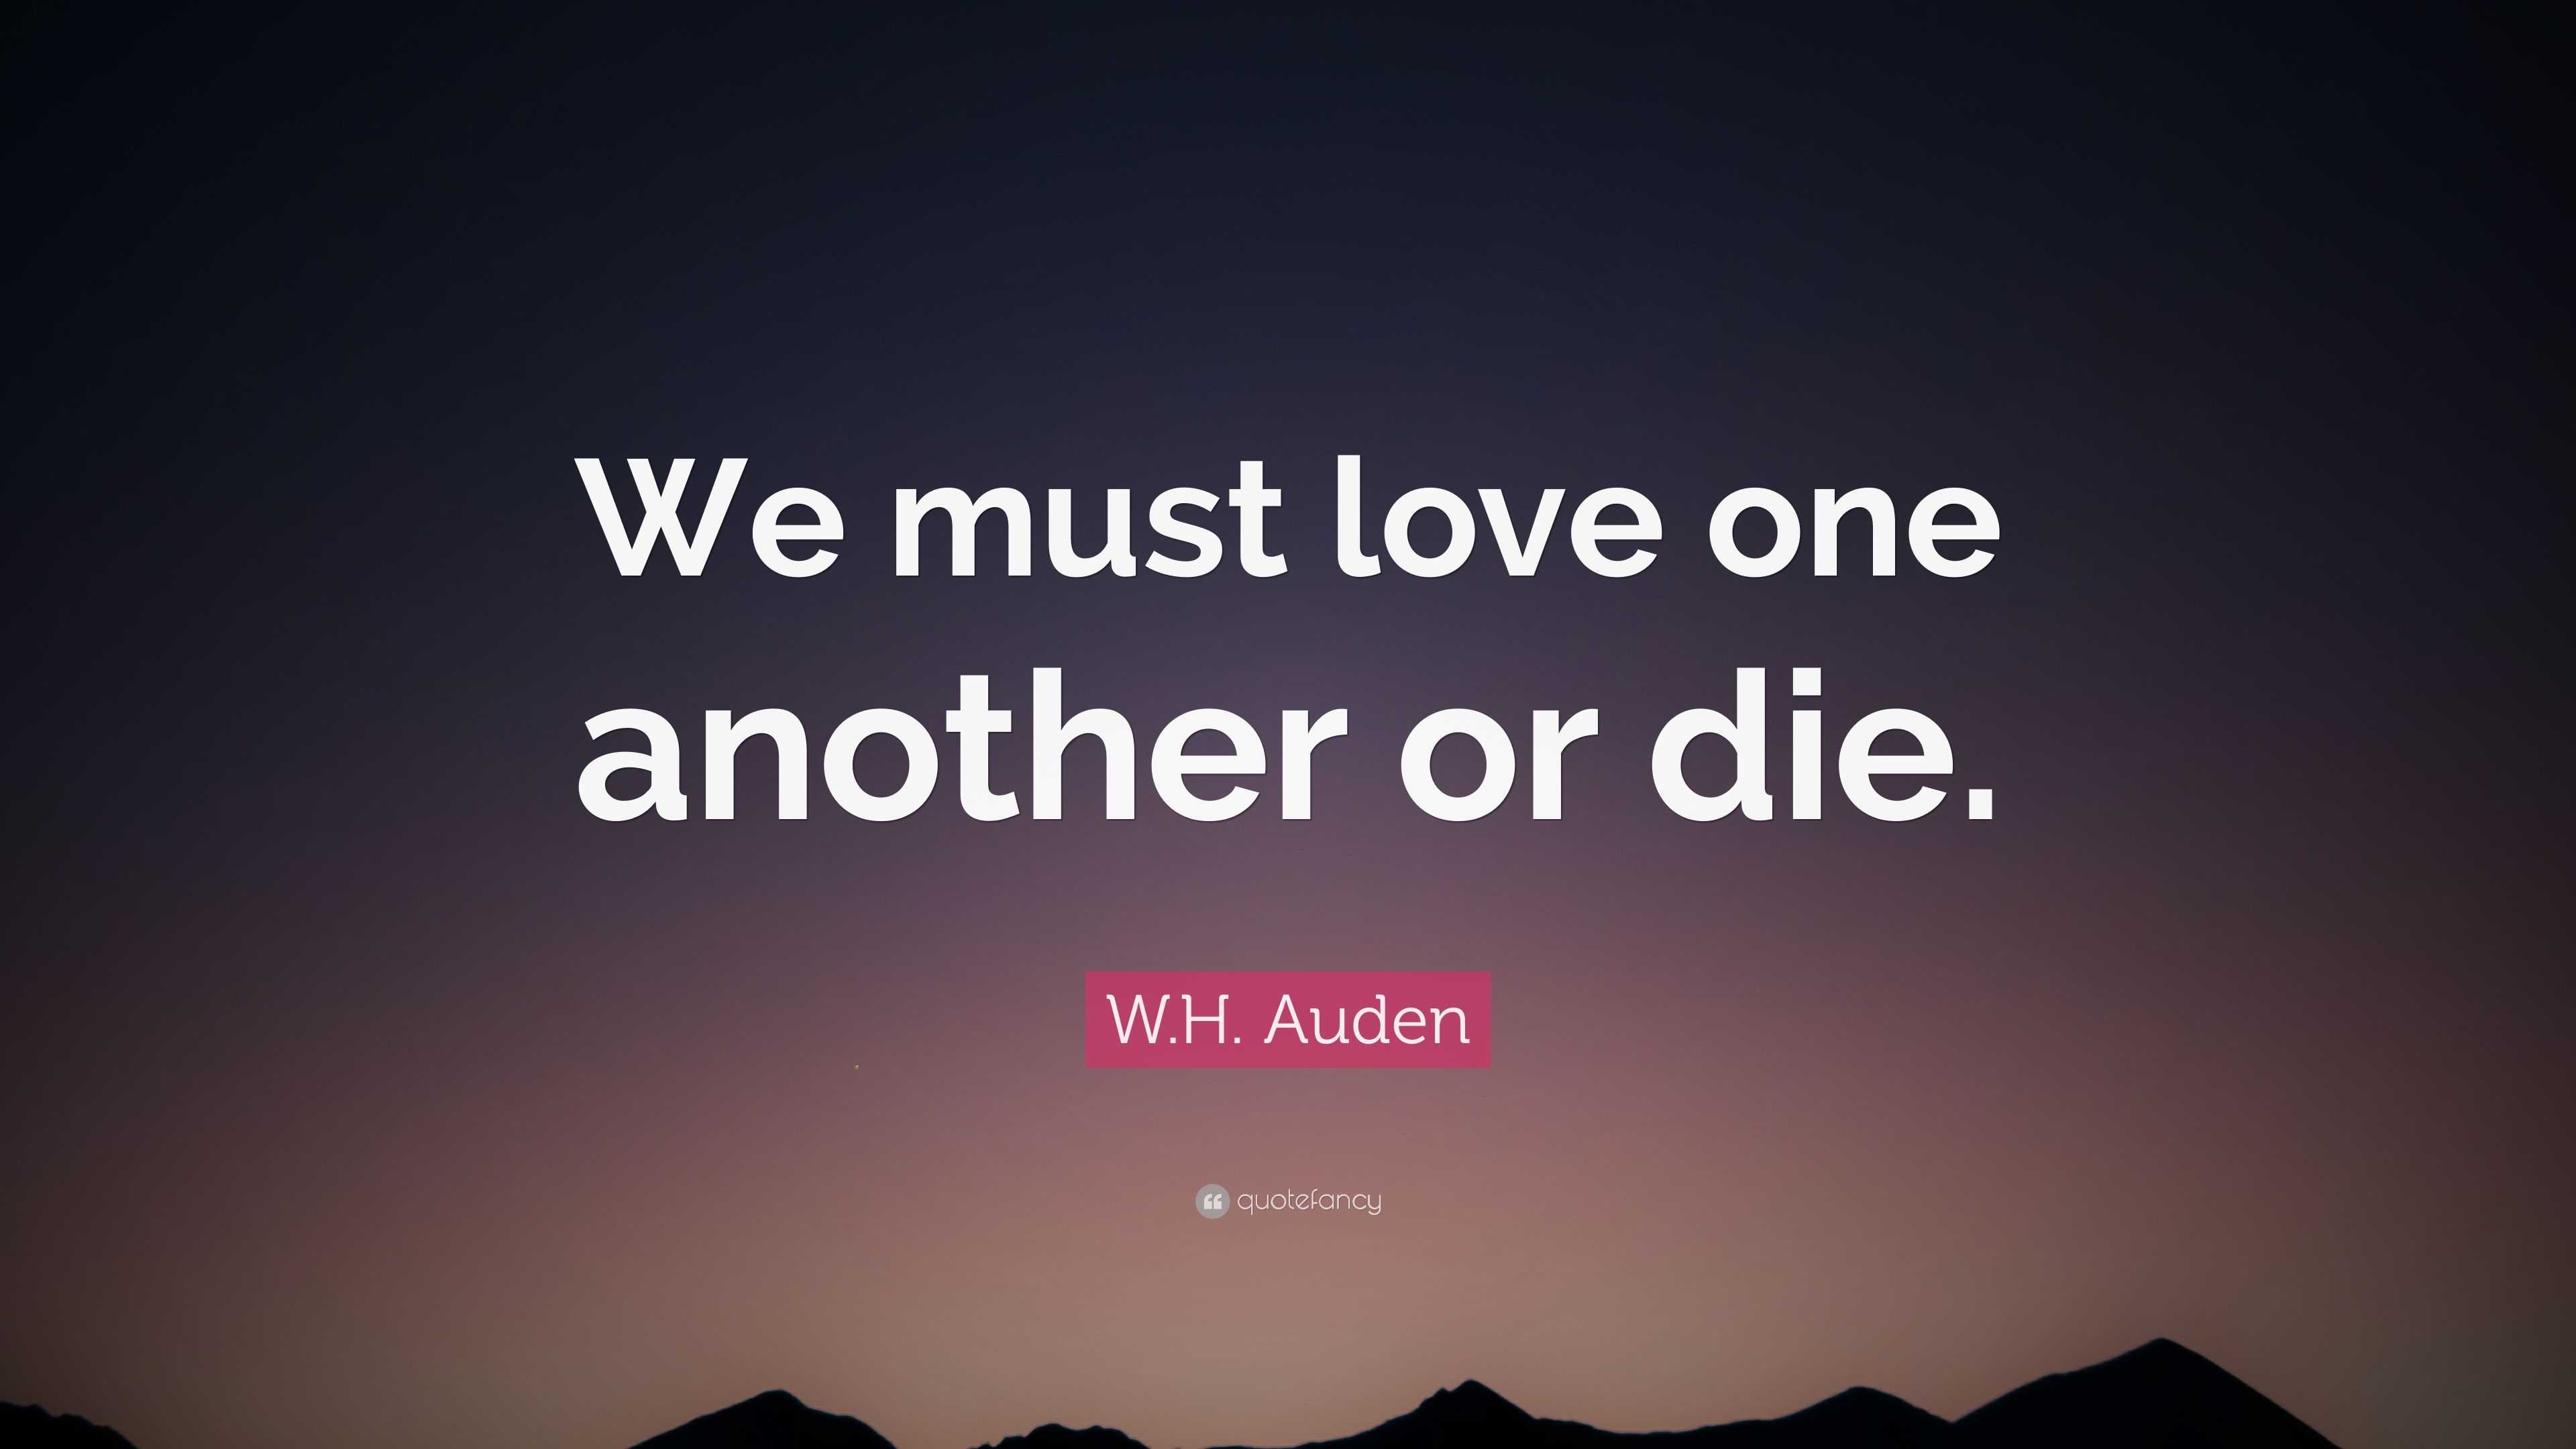 W H Auden Quote “We must love one another or ”